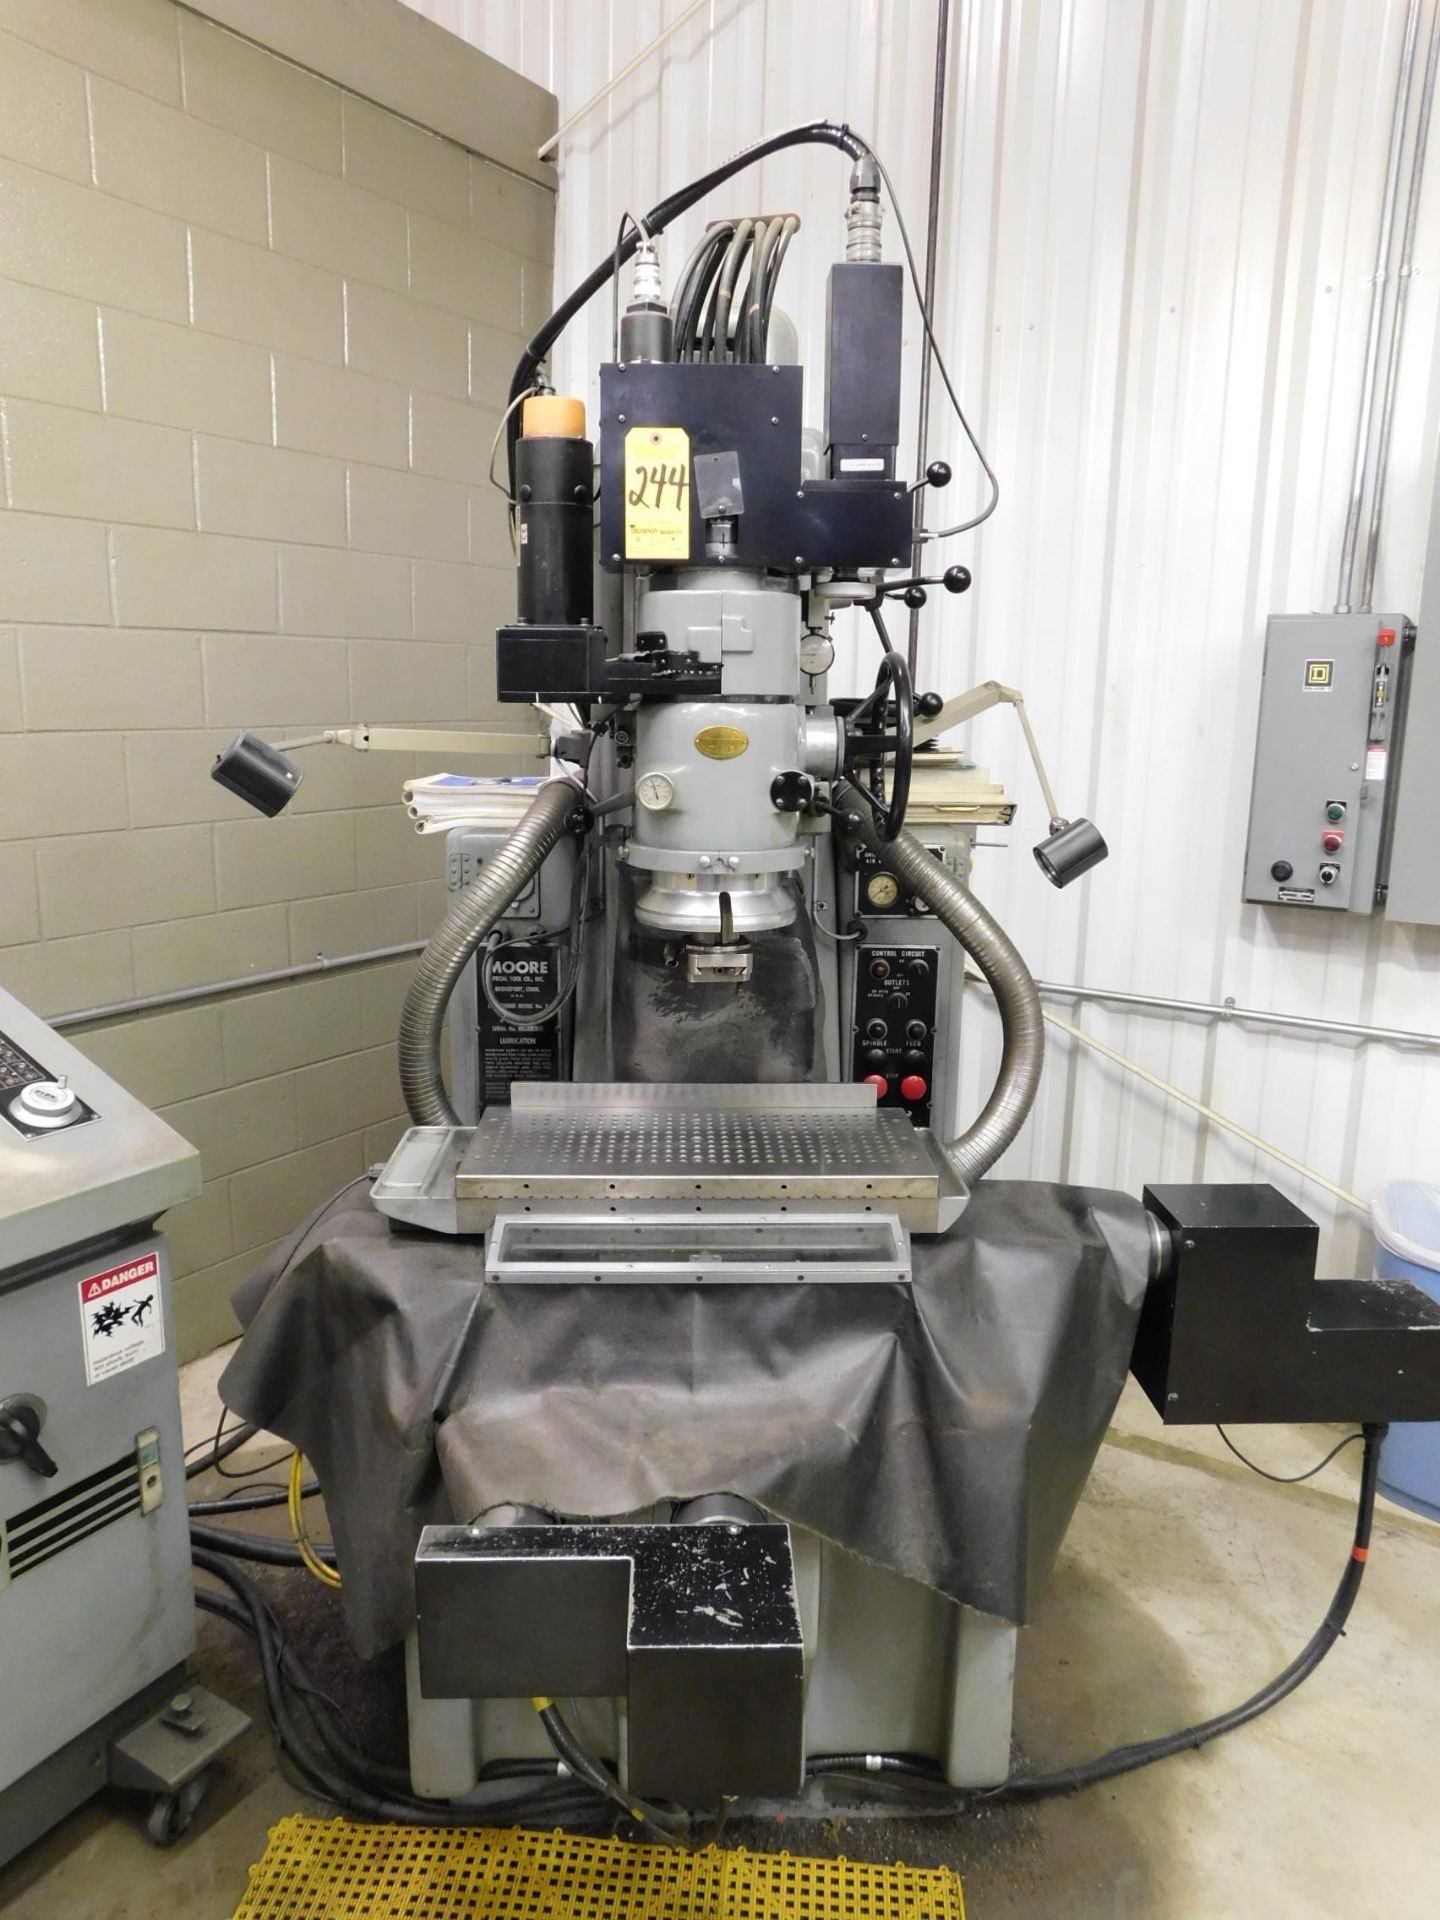 Moore Model #3 CNC Jig Grinder snG163w/NASA/Fagor Model AGS-3 CNC Control (NOT IN SERVICE) - Image 2 of 13